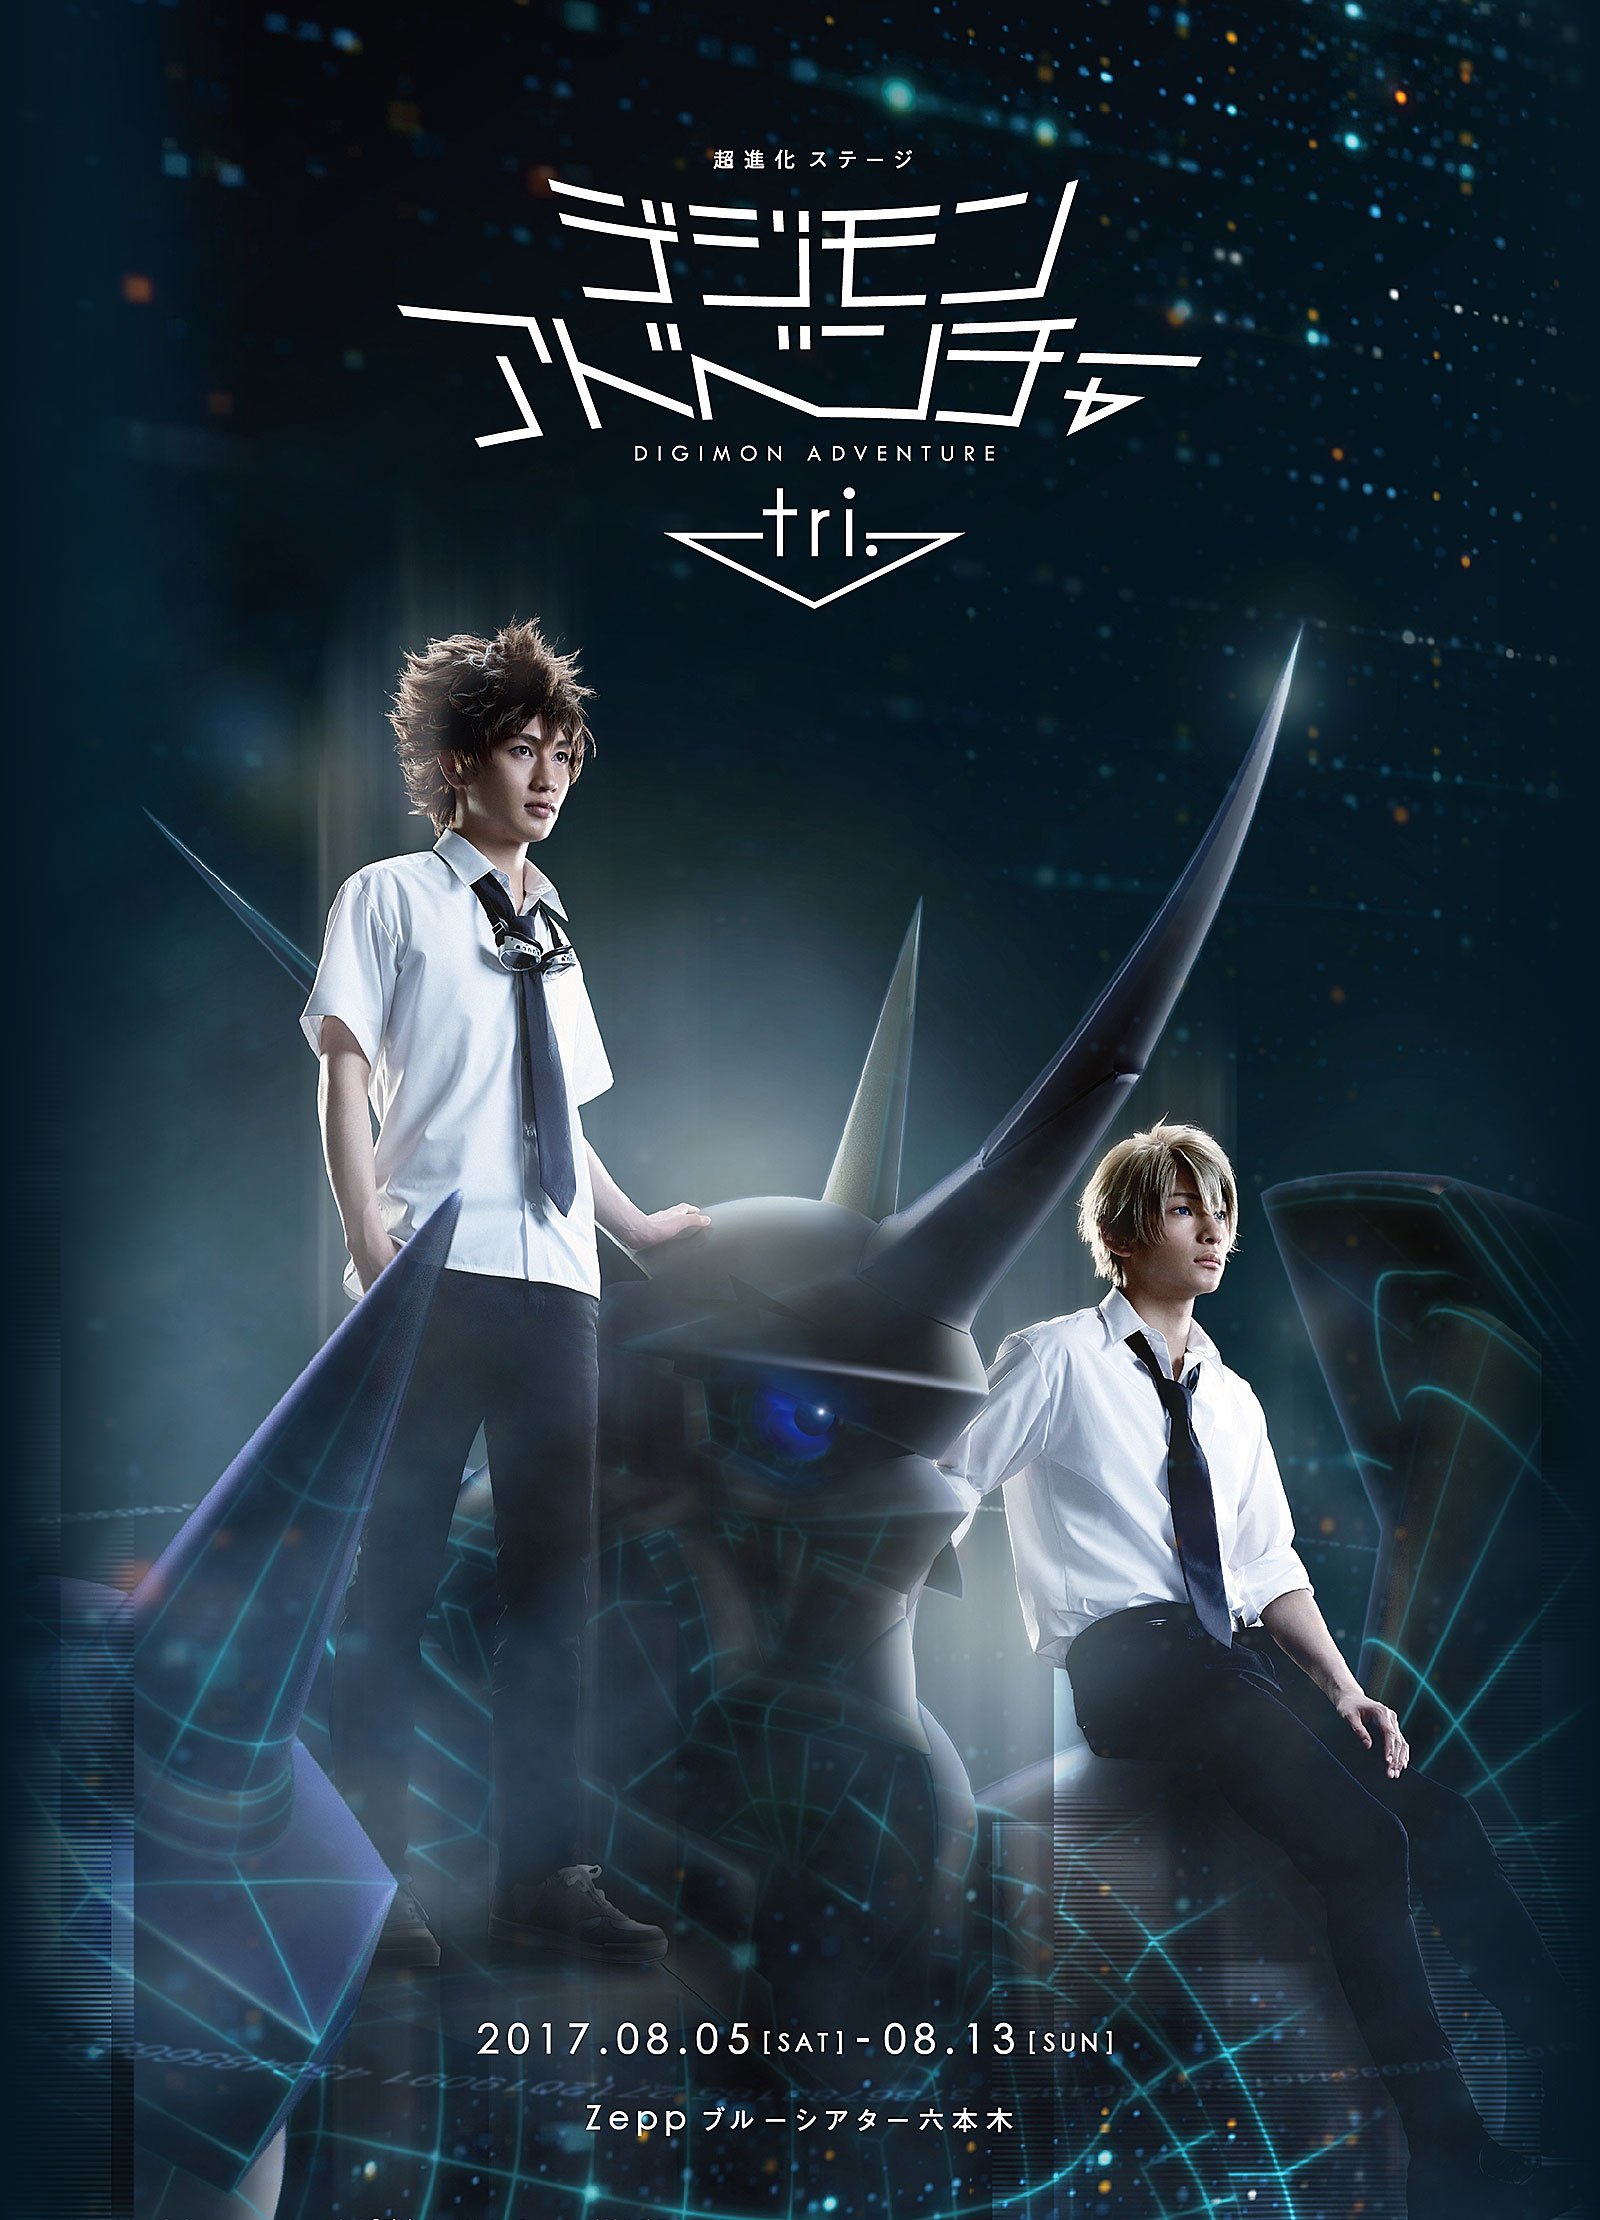 With the Will Digimon Forums, News, Podcast on X: There's going to be  livestreams of the Digimon Adventure tri. Stage Play! if you live in  Japan. More at WtW-   /